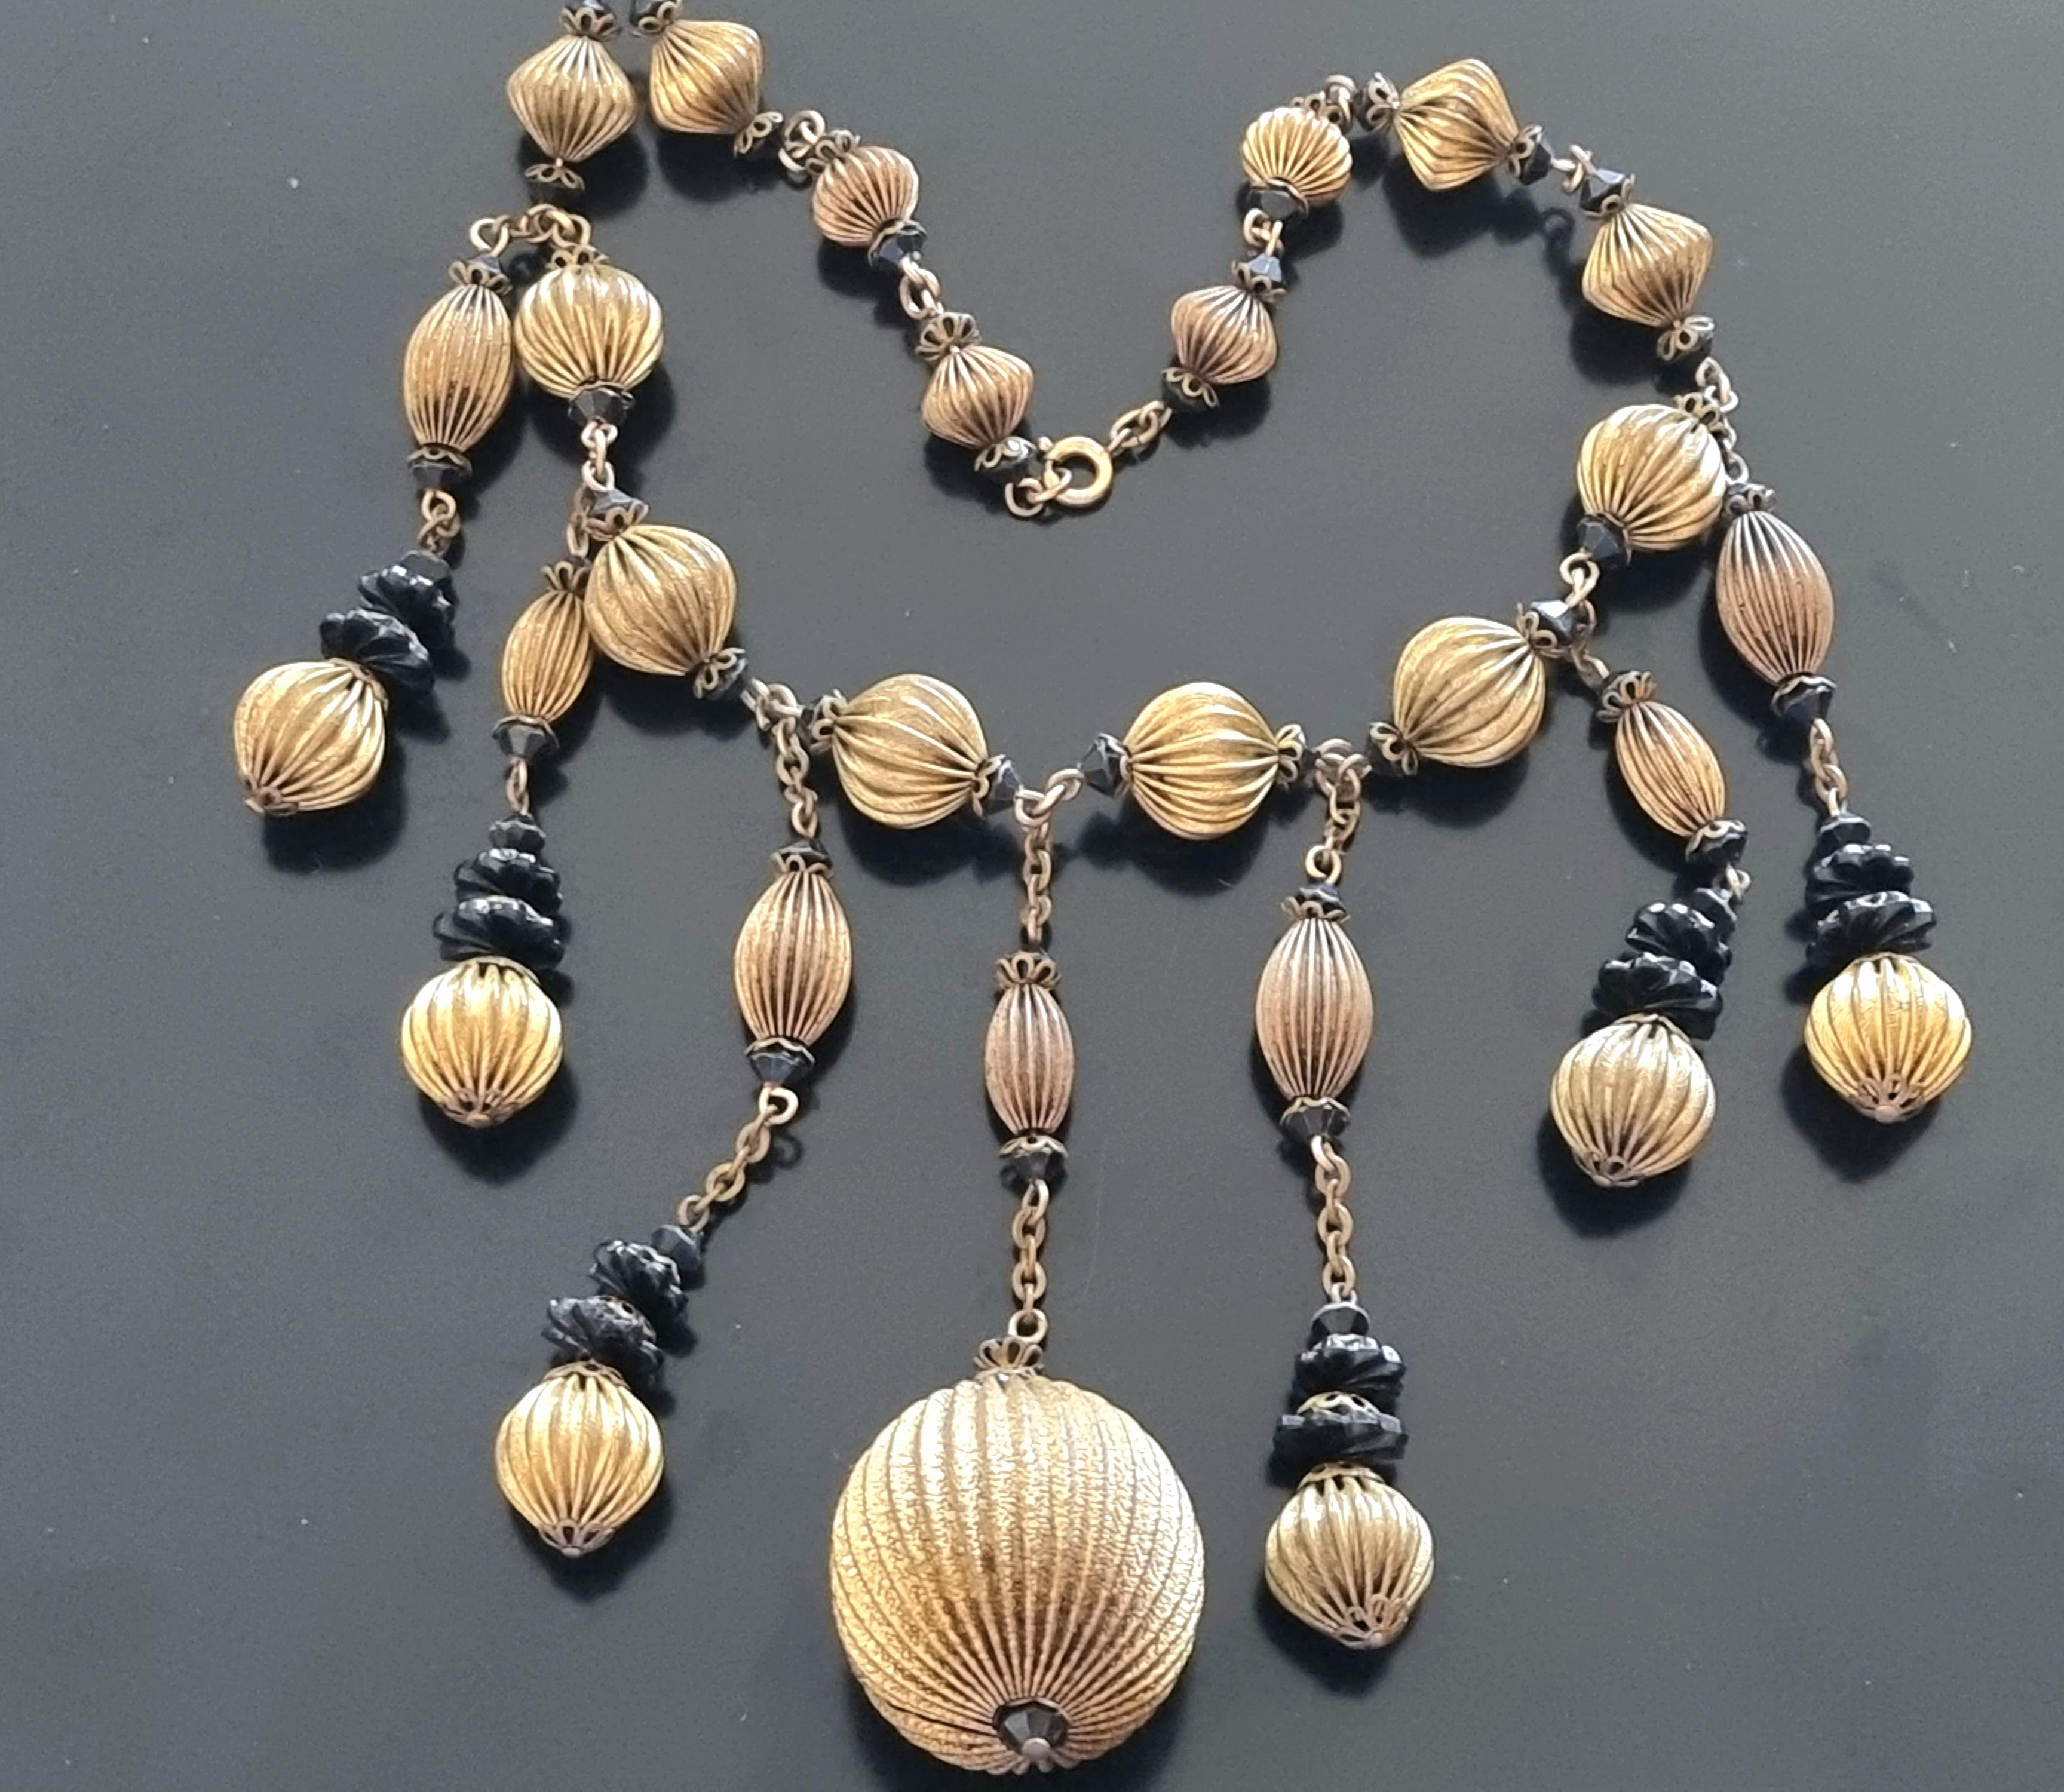 Beautiful old NECKLACE,
50s vintage,
by FRANÇOISE MONTAGUE,
necklace length 40 cm, weight 50 g (very light),
length of the central pendant 10 cm,
central bead dimension 3 cm,
good condition.

Françoise MONTAGUE took over the De Saurma jewelry